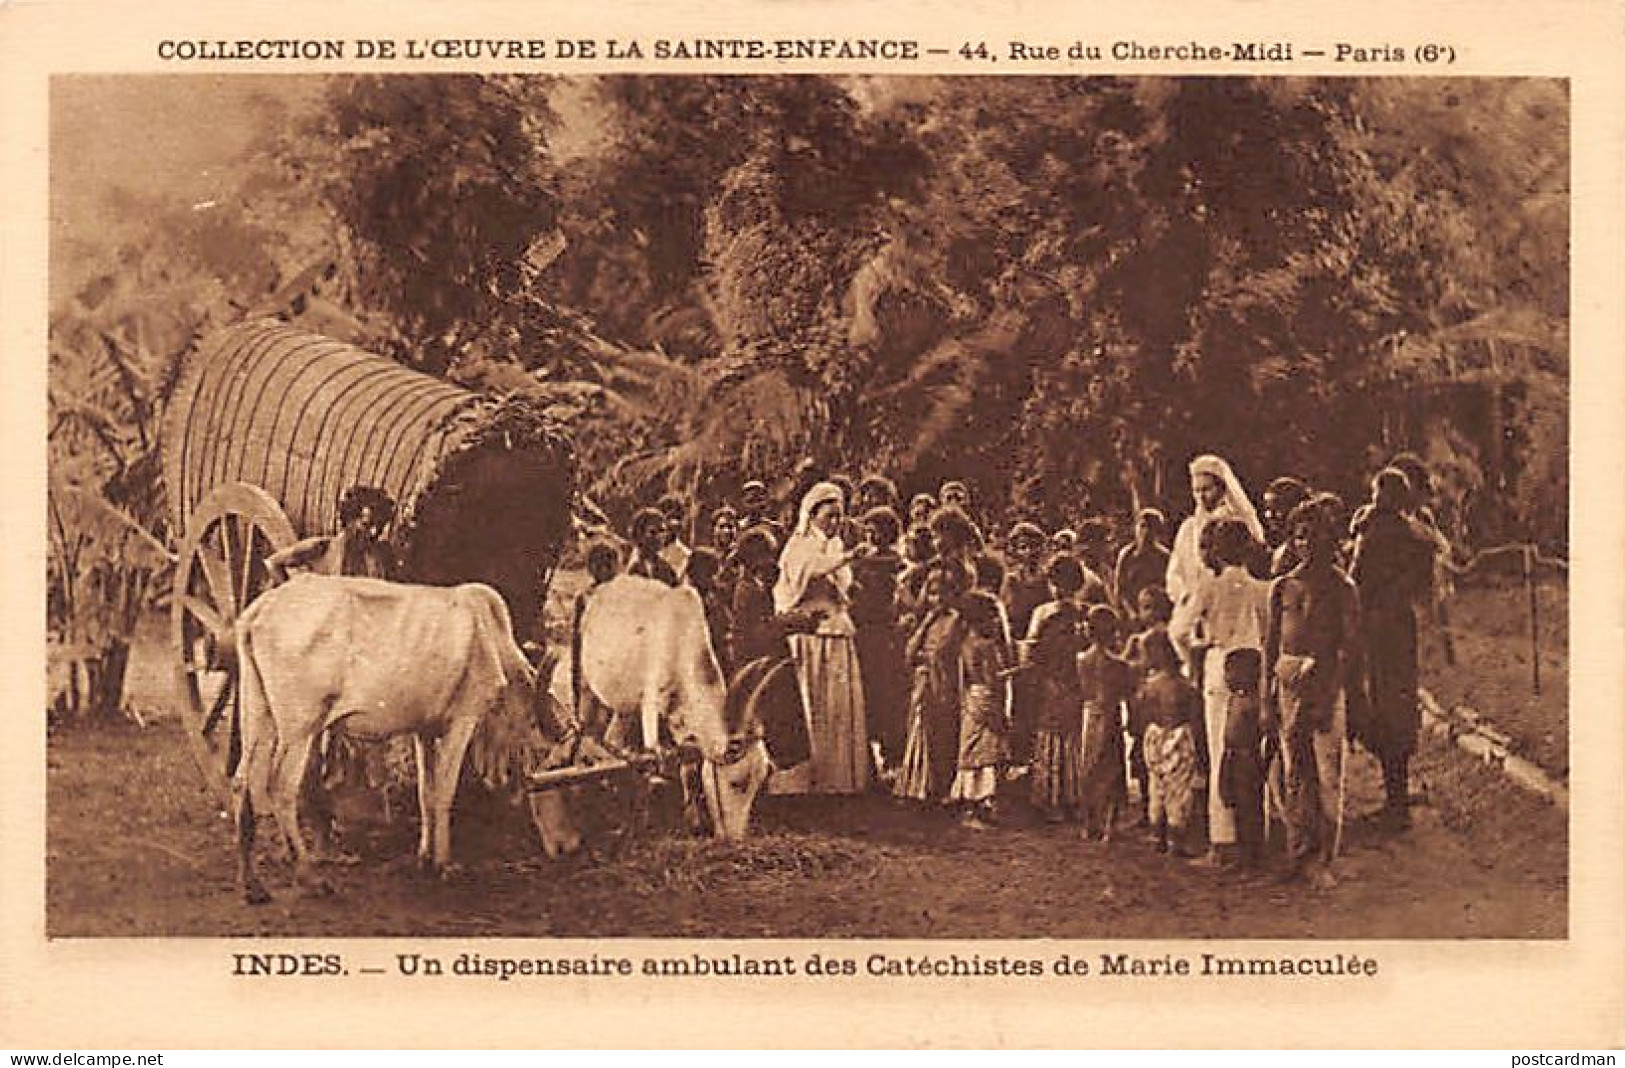 India - A Mobile Dispensary Of The Missionary Catechists Of Mary Immaculate - Publ. Oeuvre De La Sainte-Enfance  - Inde